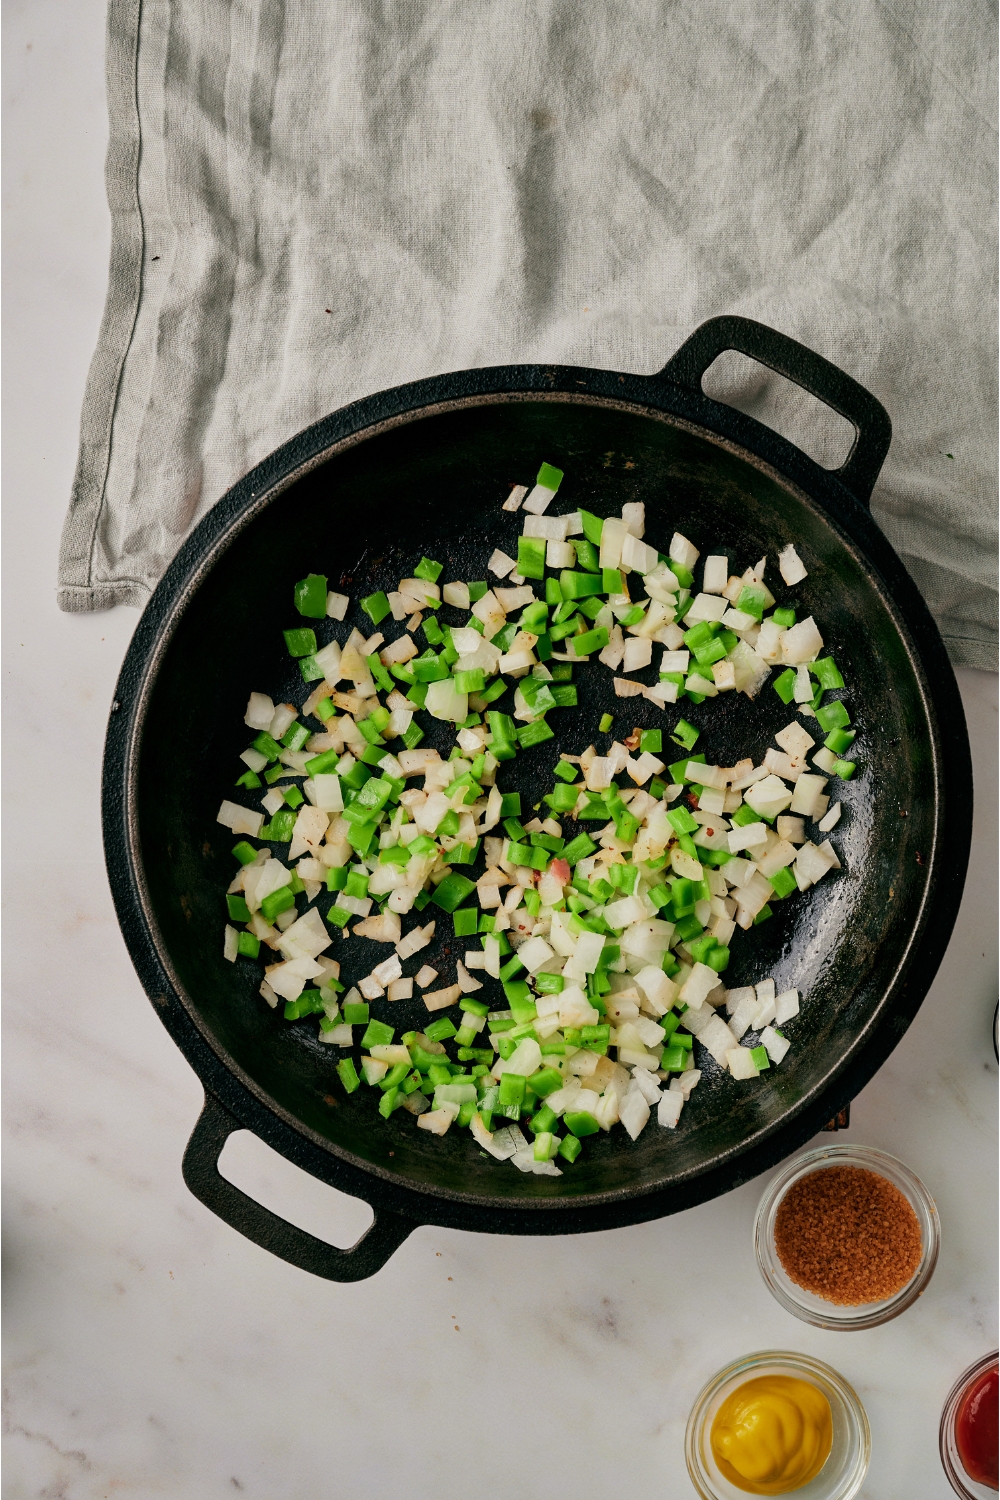 A black skillet filled with diced onion and green bell pepper.